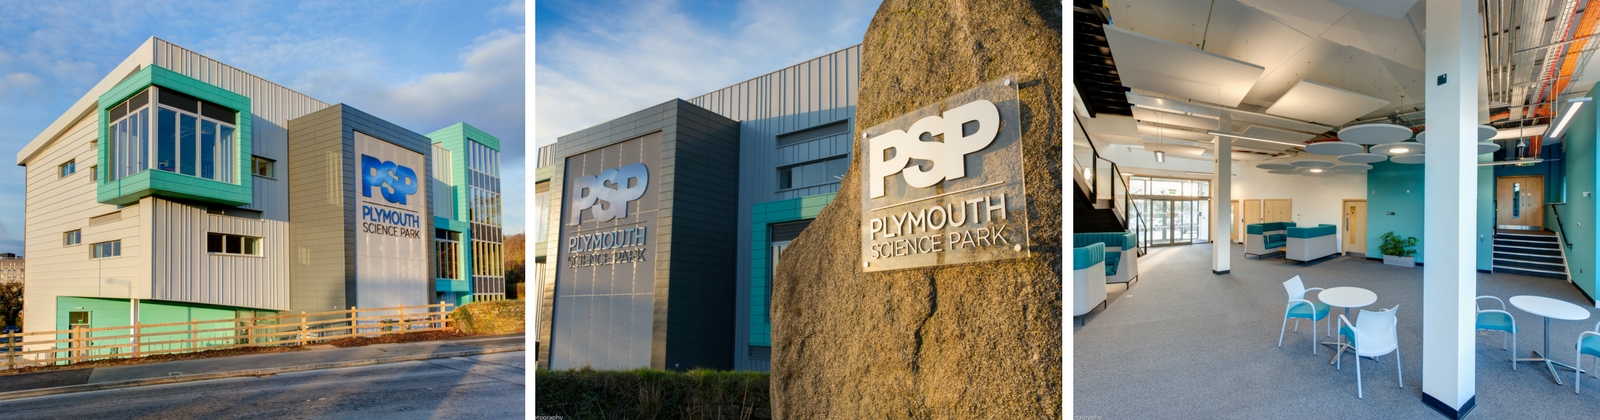 One Research Way, Plymouth Science Park wins Commercial Project of the Year